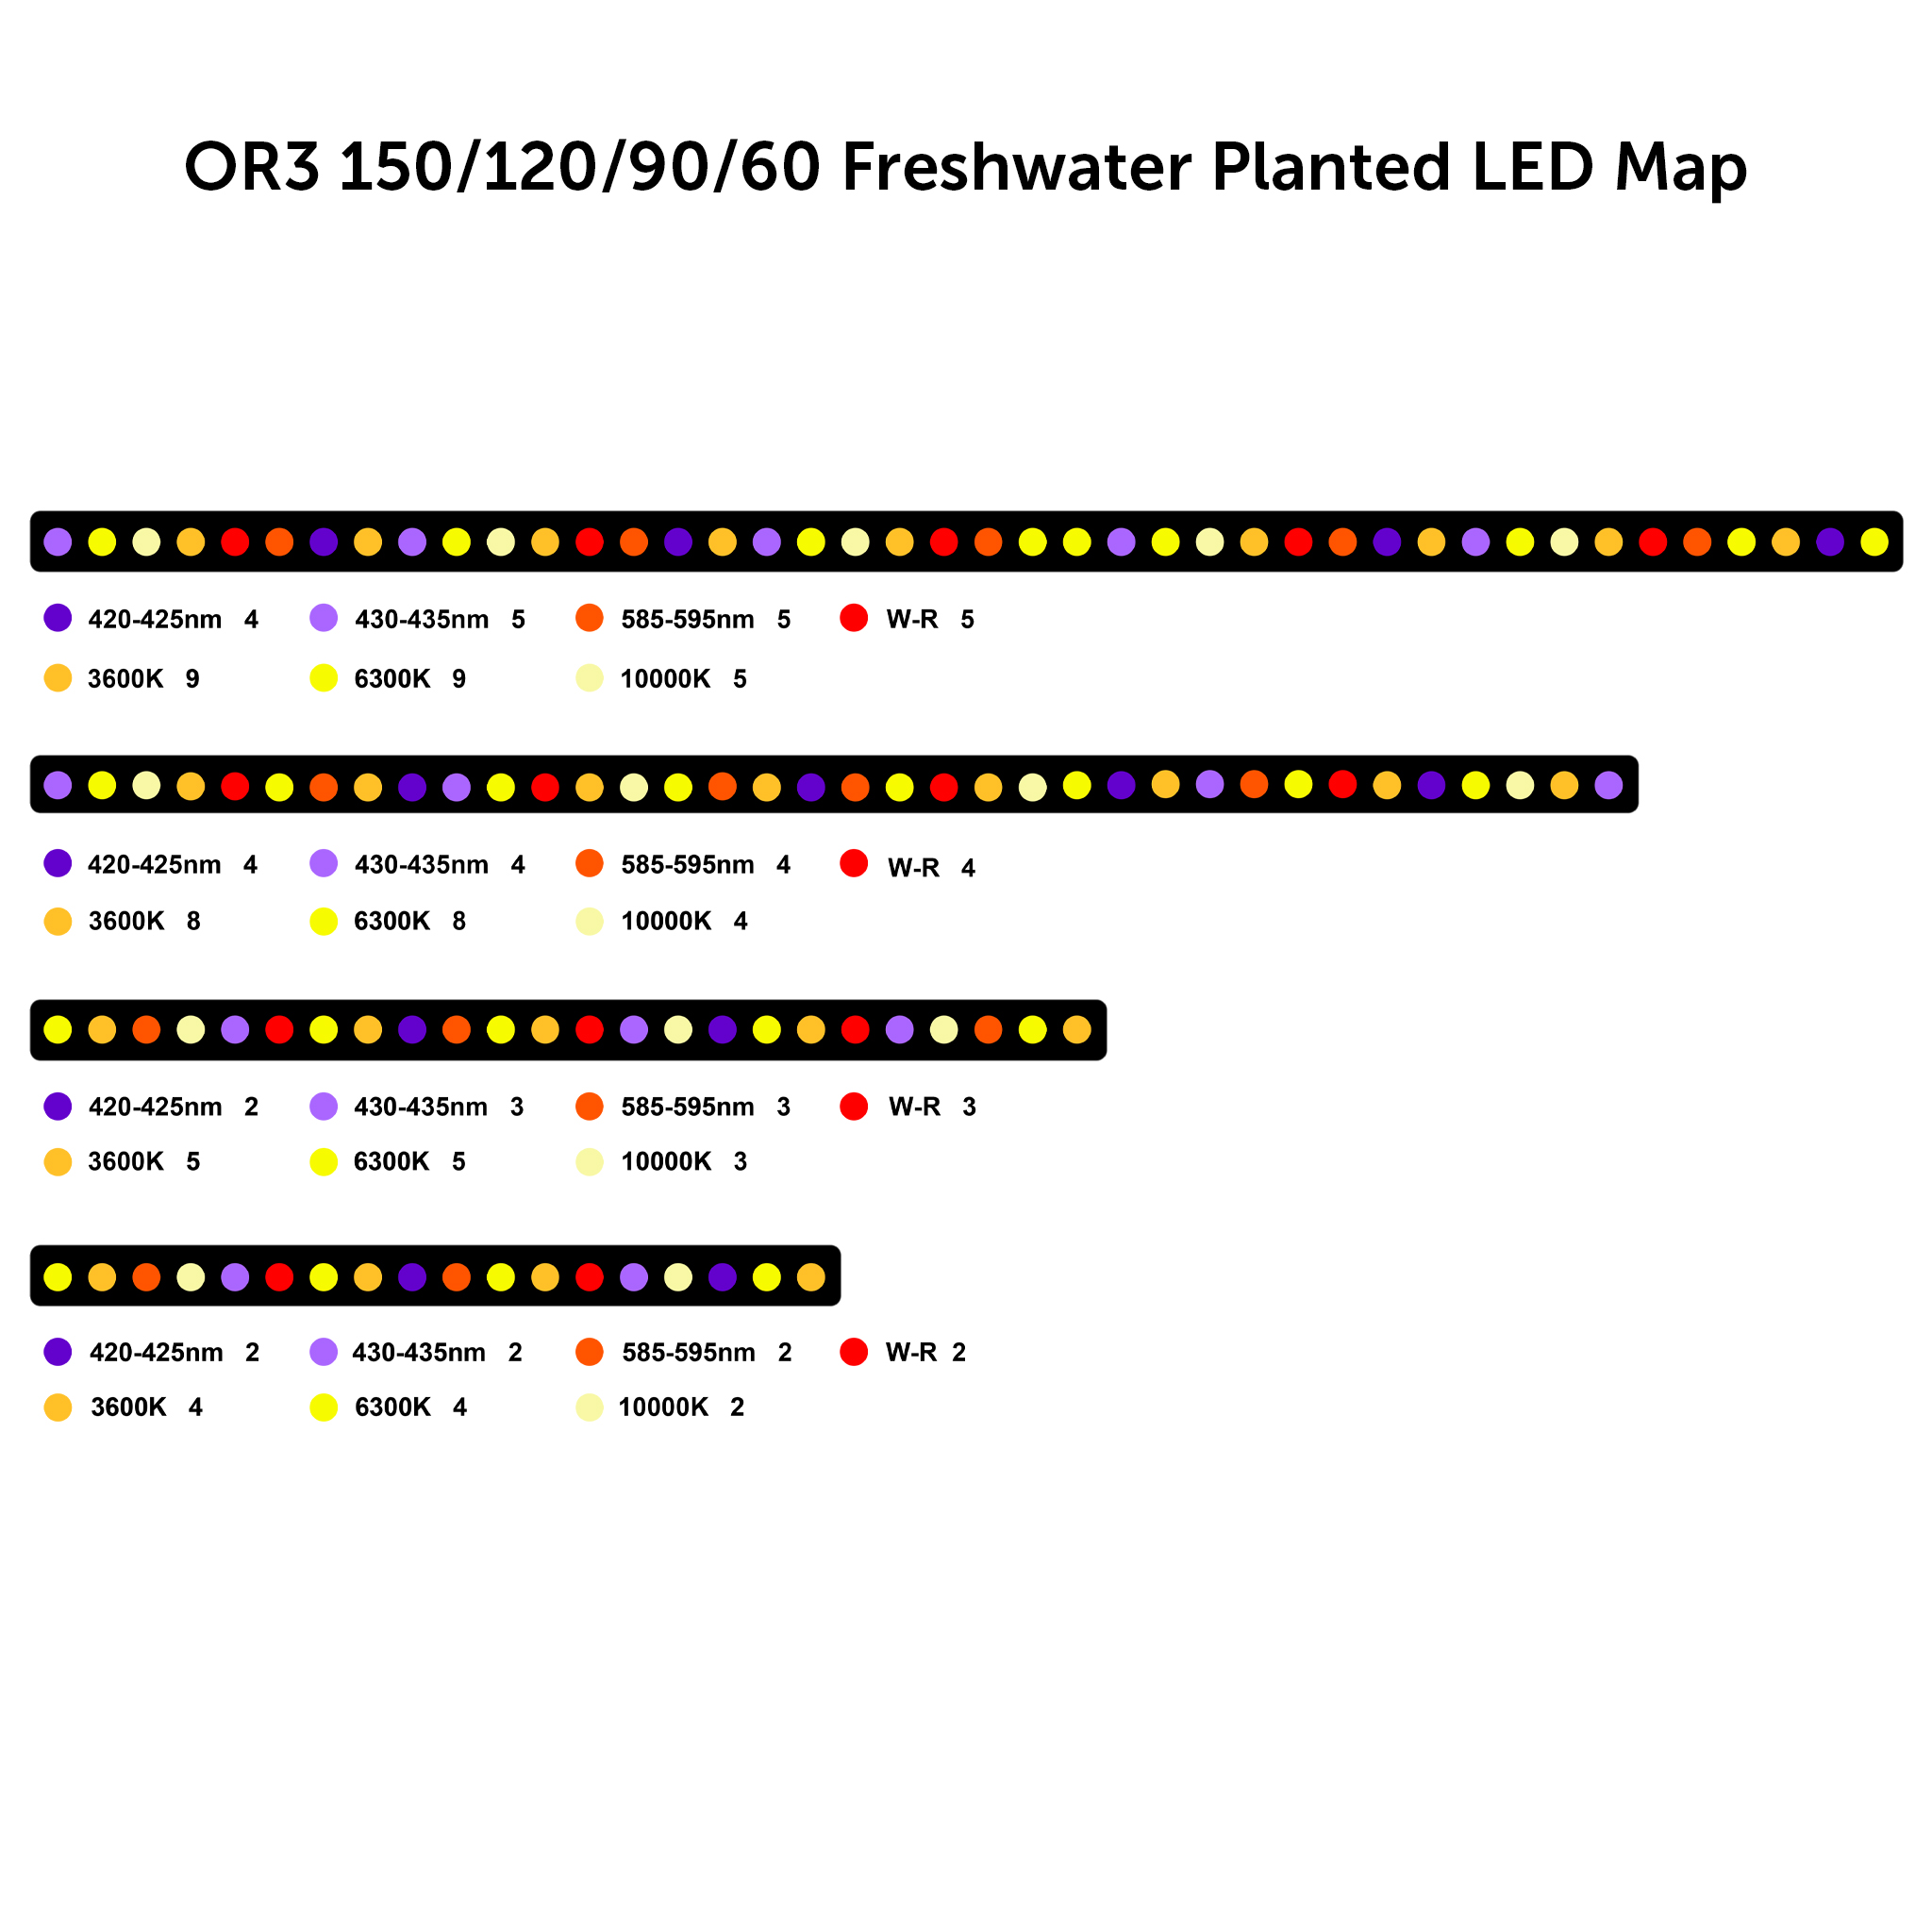 or3-freshwater-planted-led-map